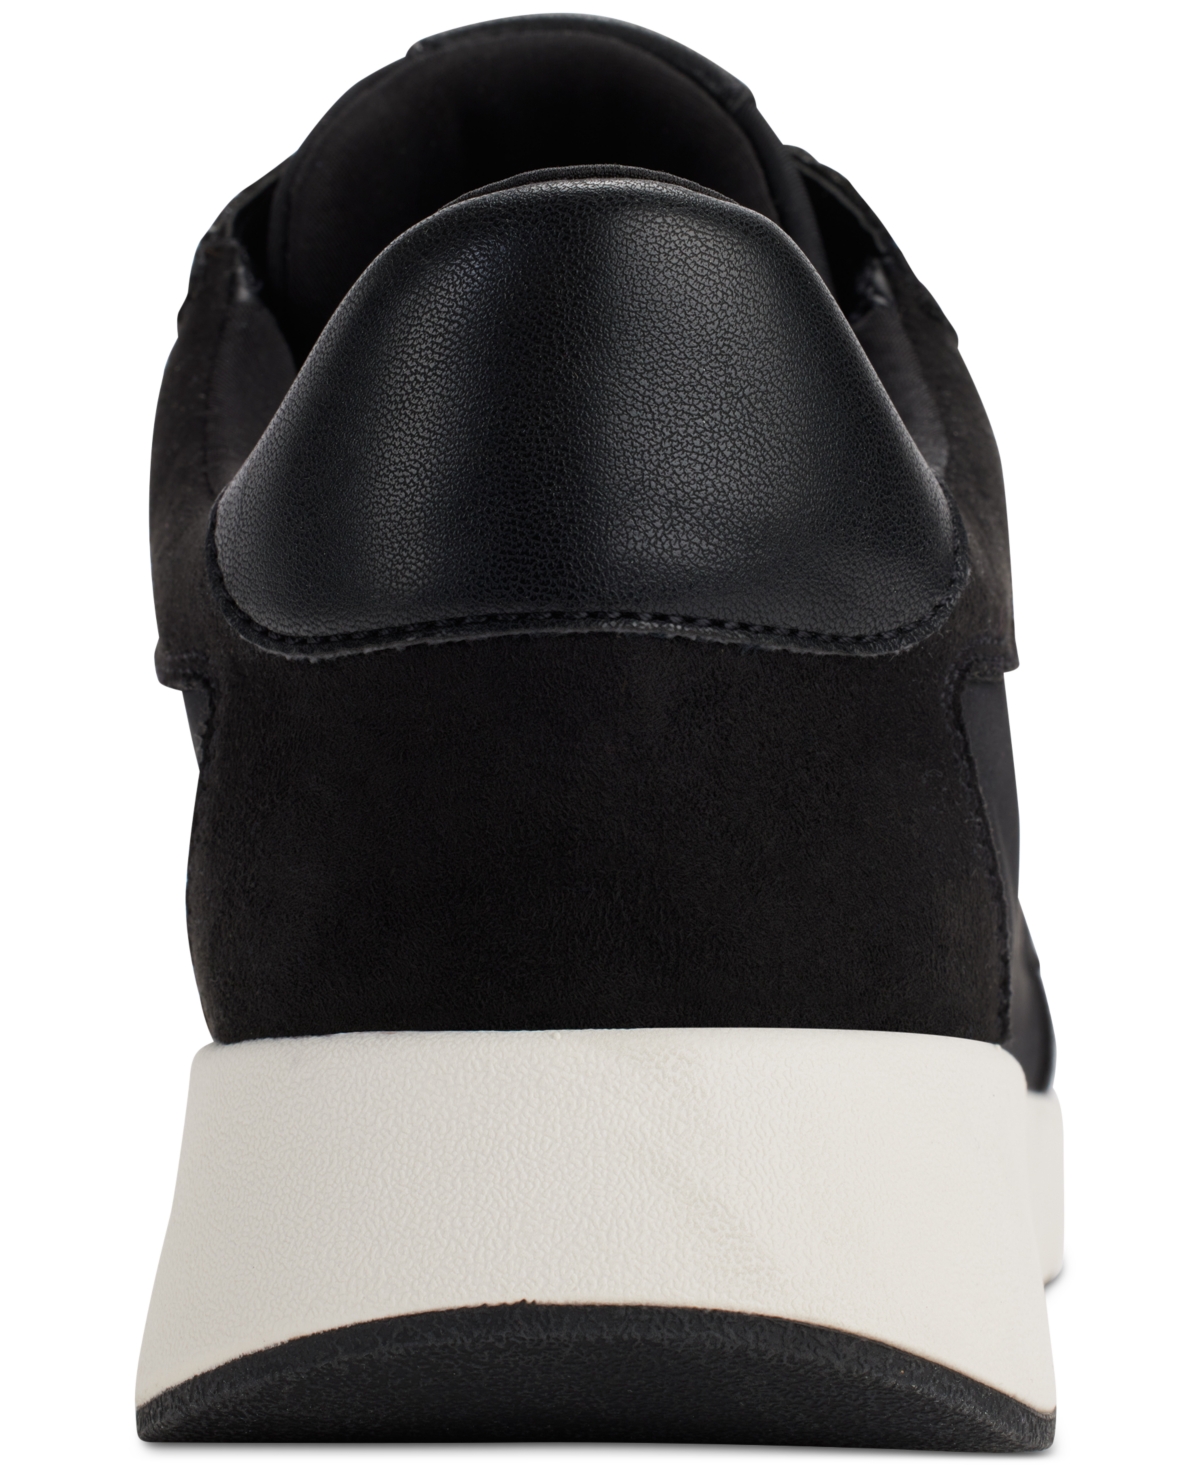 Shop Dkny Oaks Logo Applique Athletic Lace Up Sneakers, Created For Macy's In Pale Blush